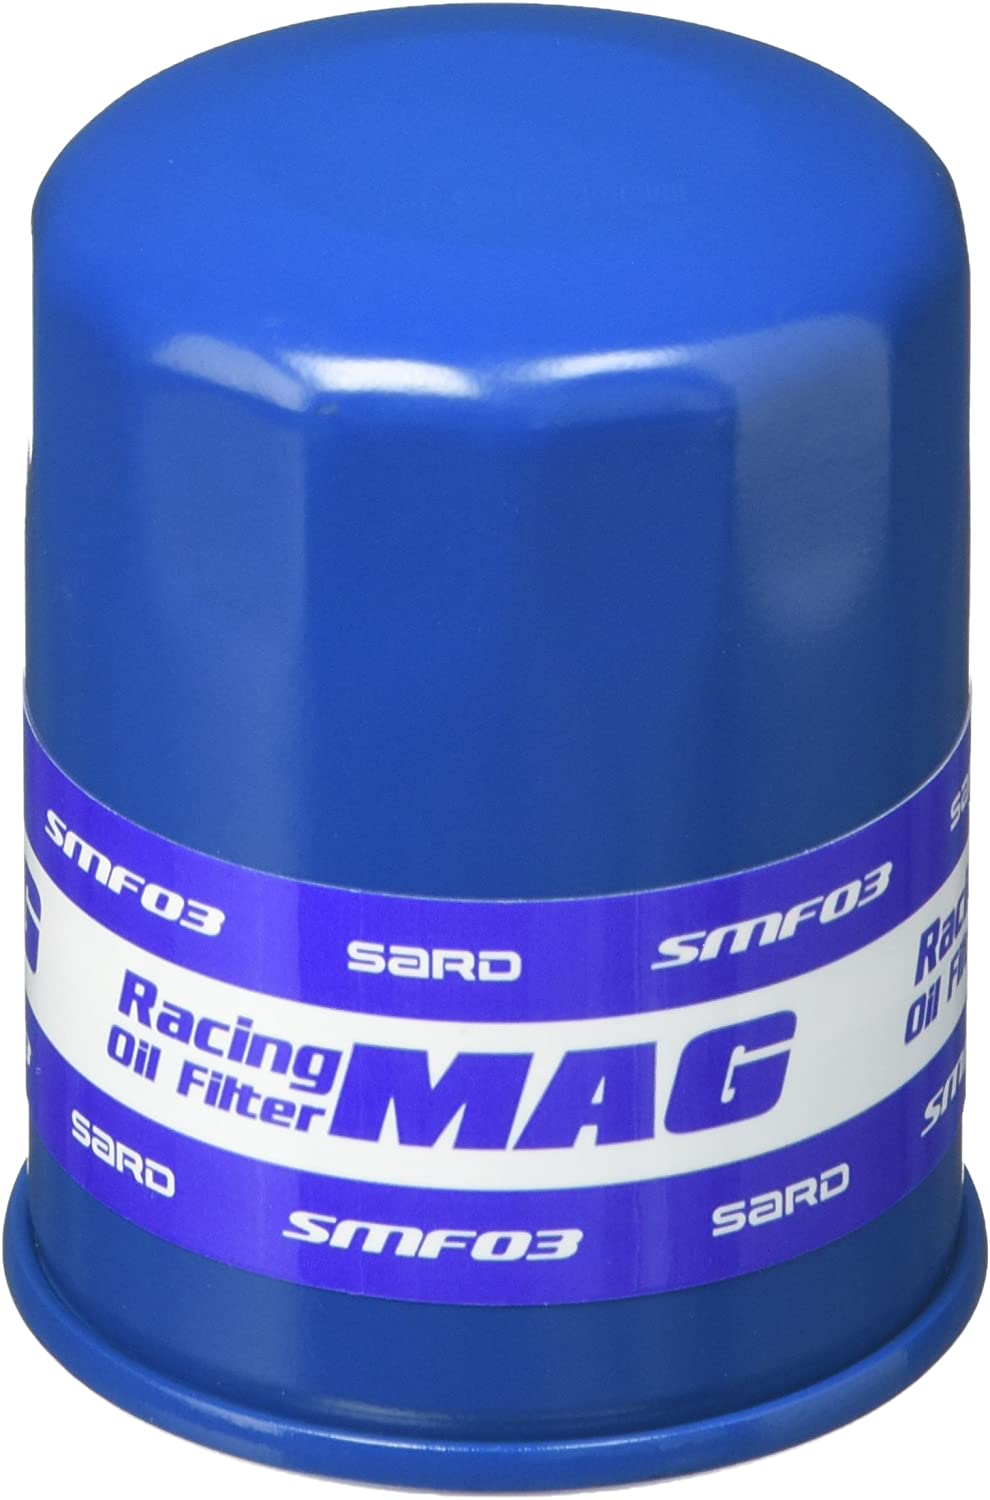 SARD RACING OIL FILTER For SWIFT HT51S HT81S SMF00